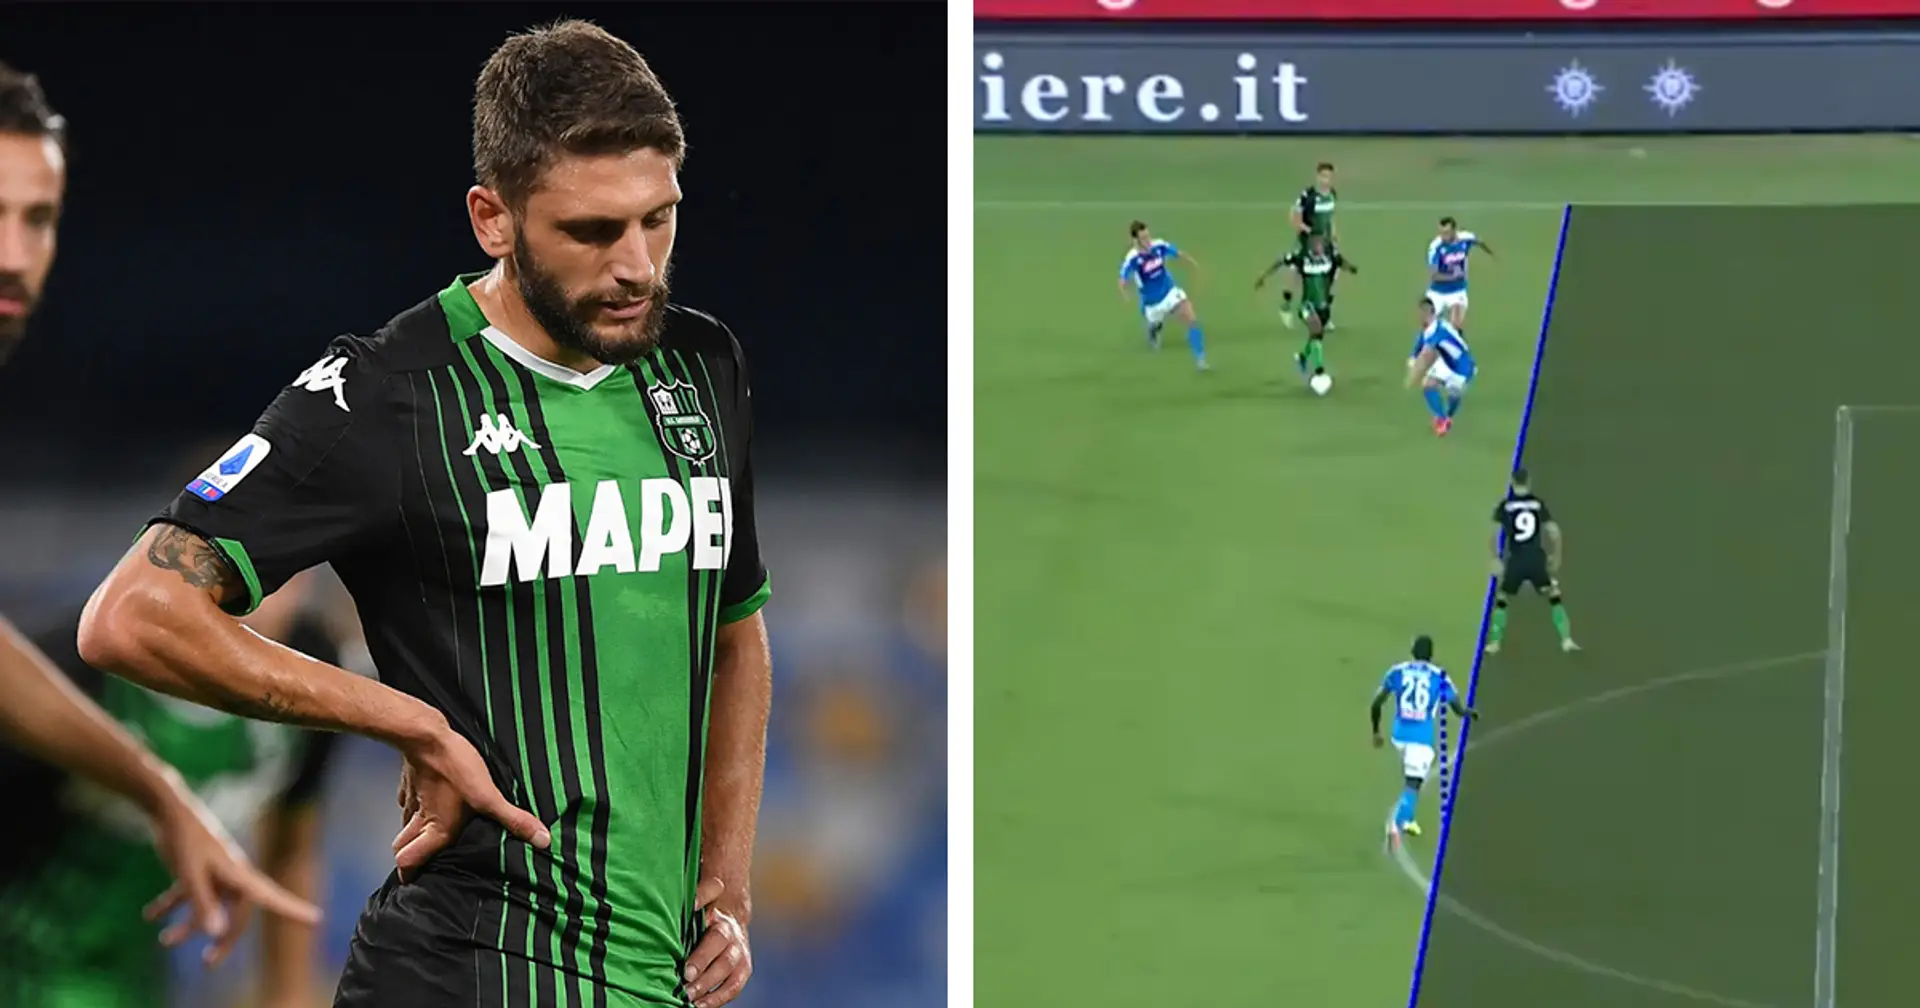 Out of luck: VAR deny Sassuolo 4 goals in thriller Napoli loss